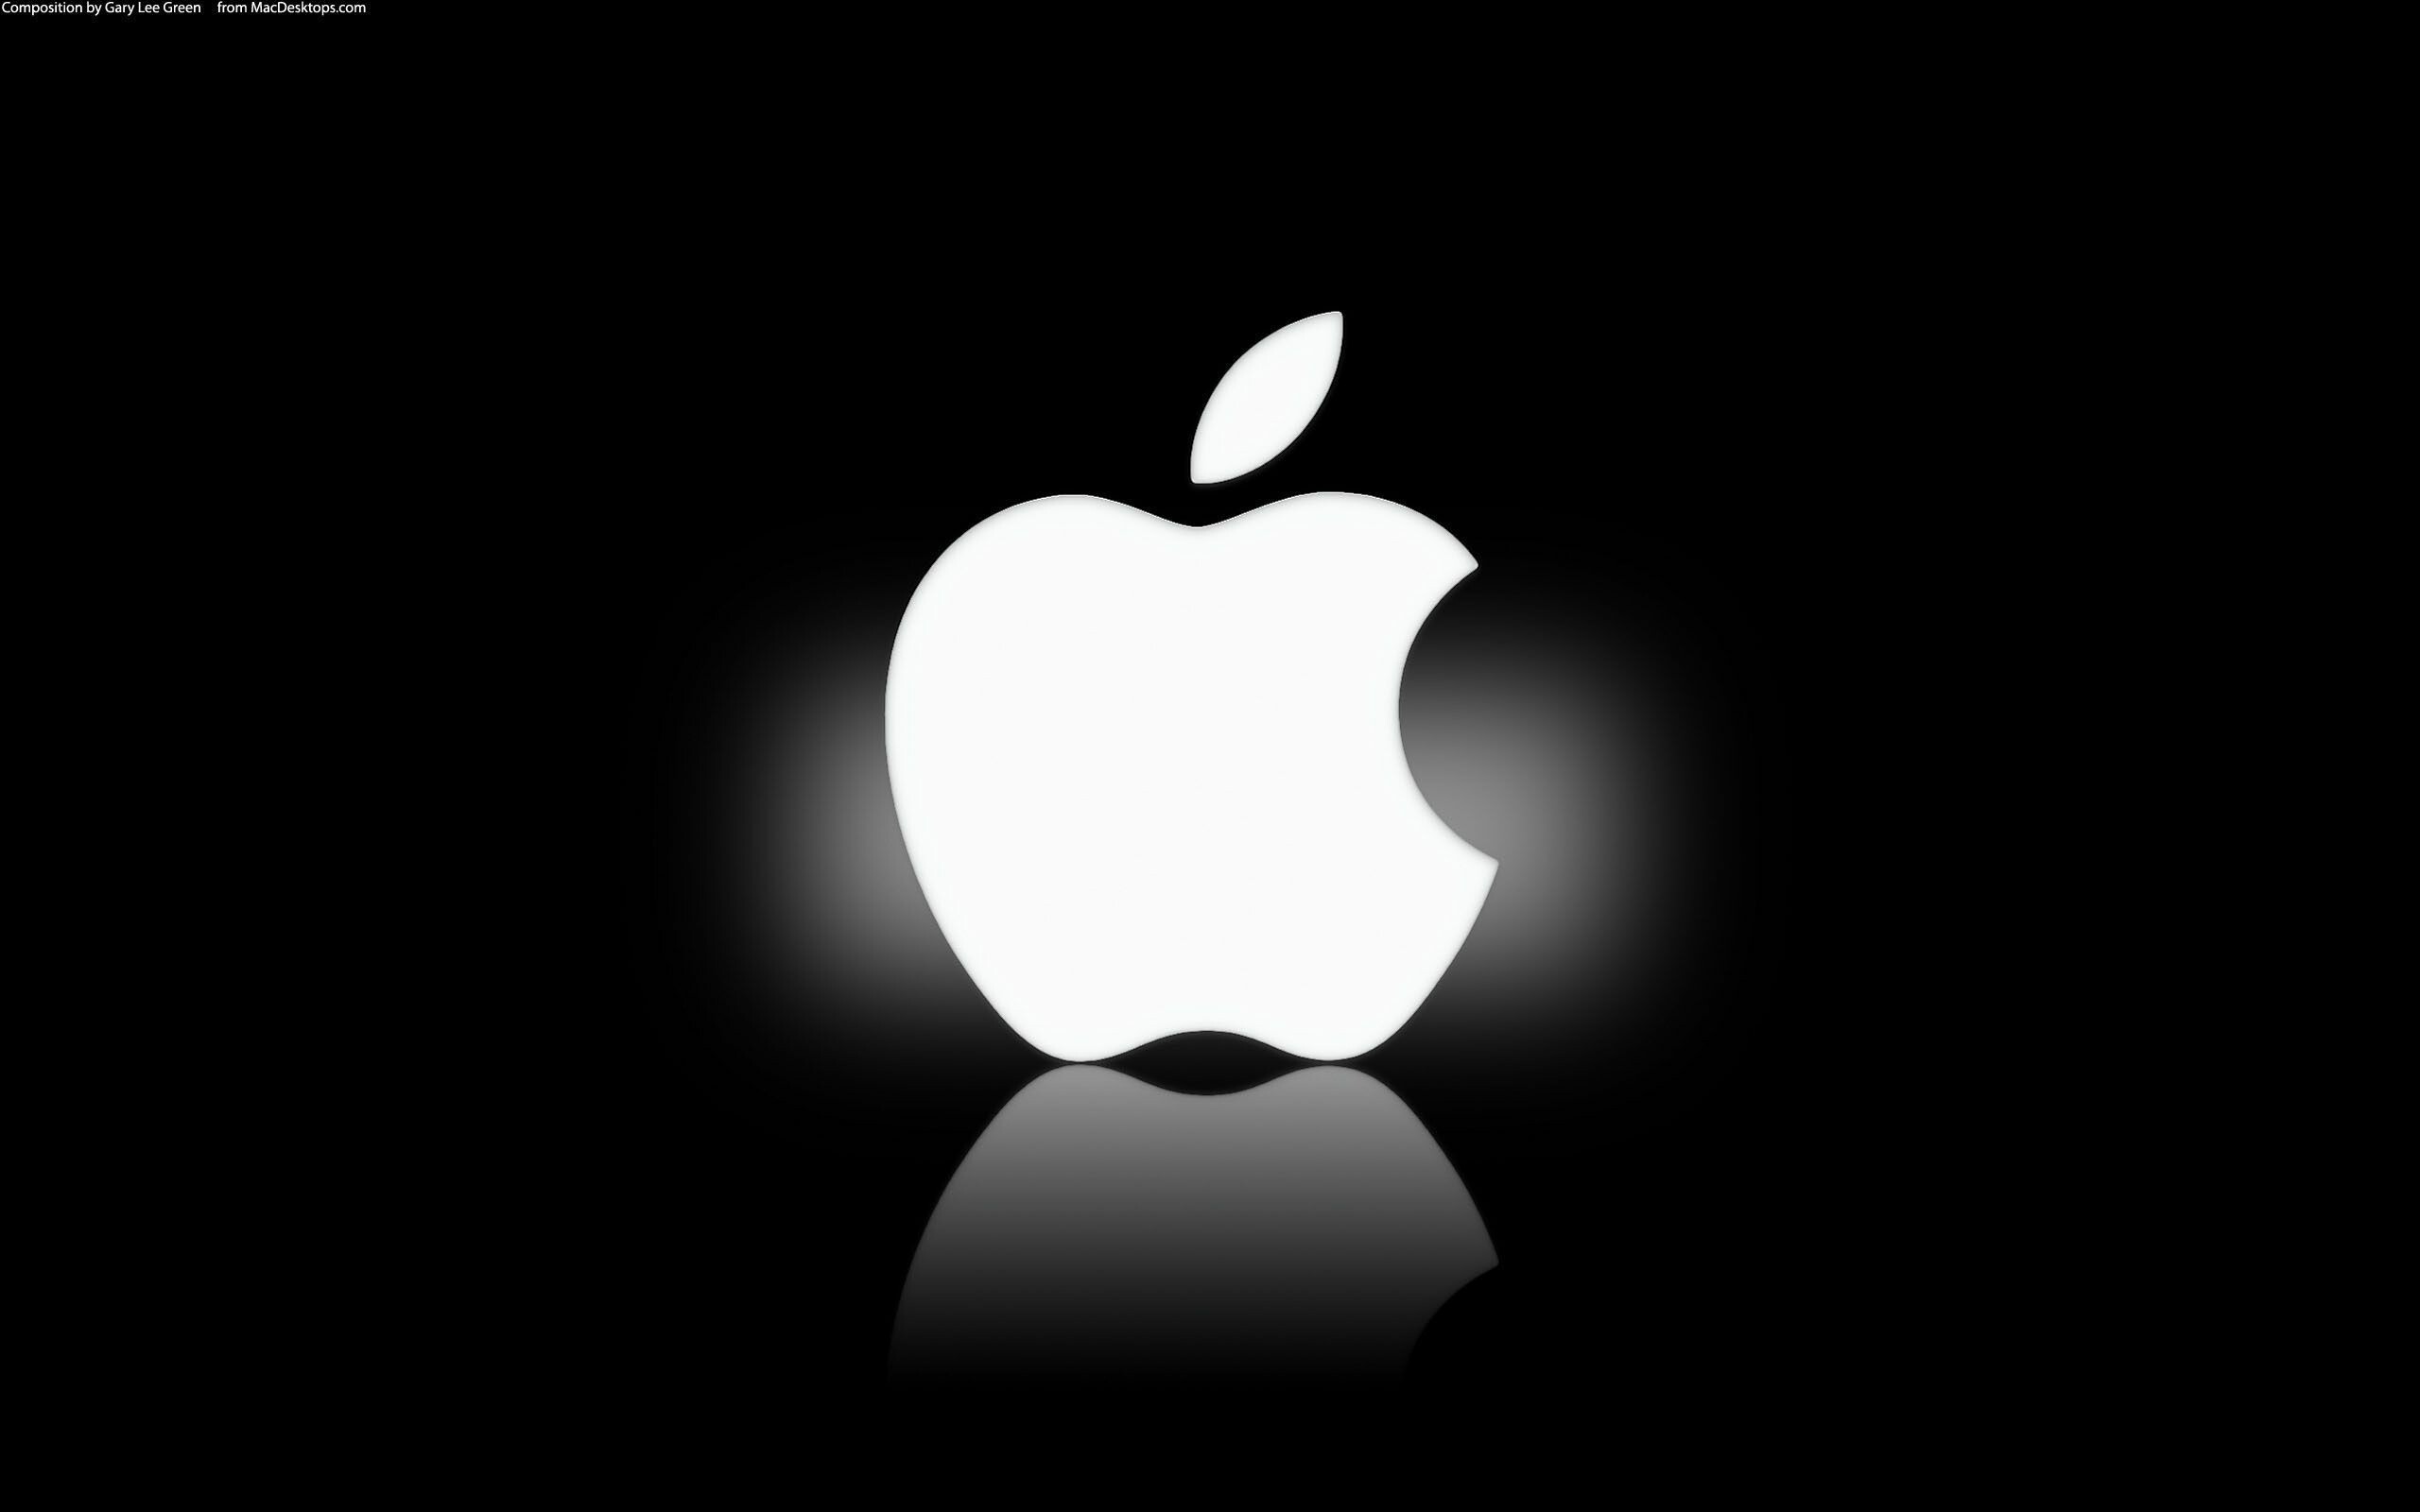 Apple Logo: A computer company, is now famous for its phones, music, TV, Monochrome. 2560x1600 HD Wallpaper.